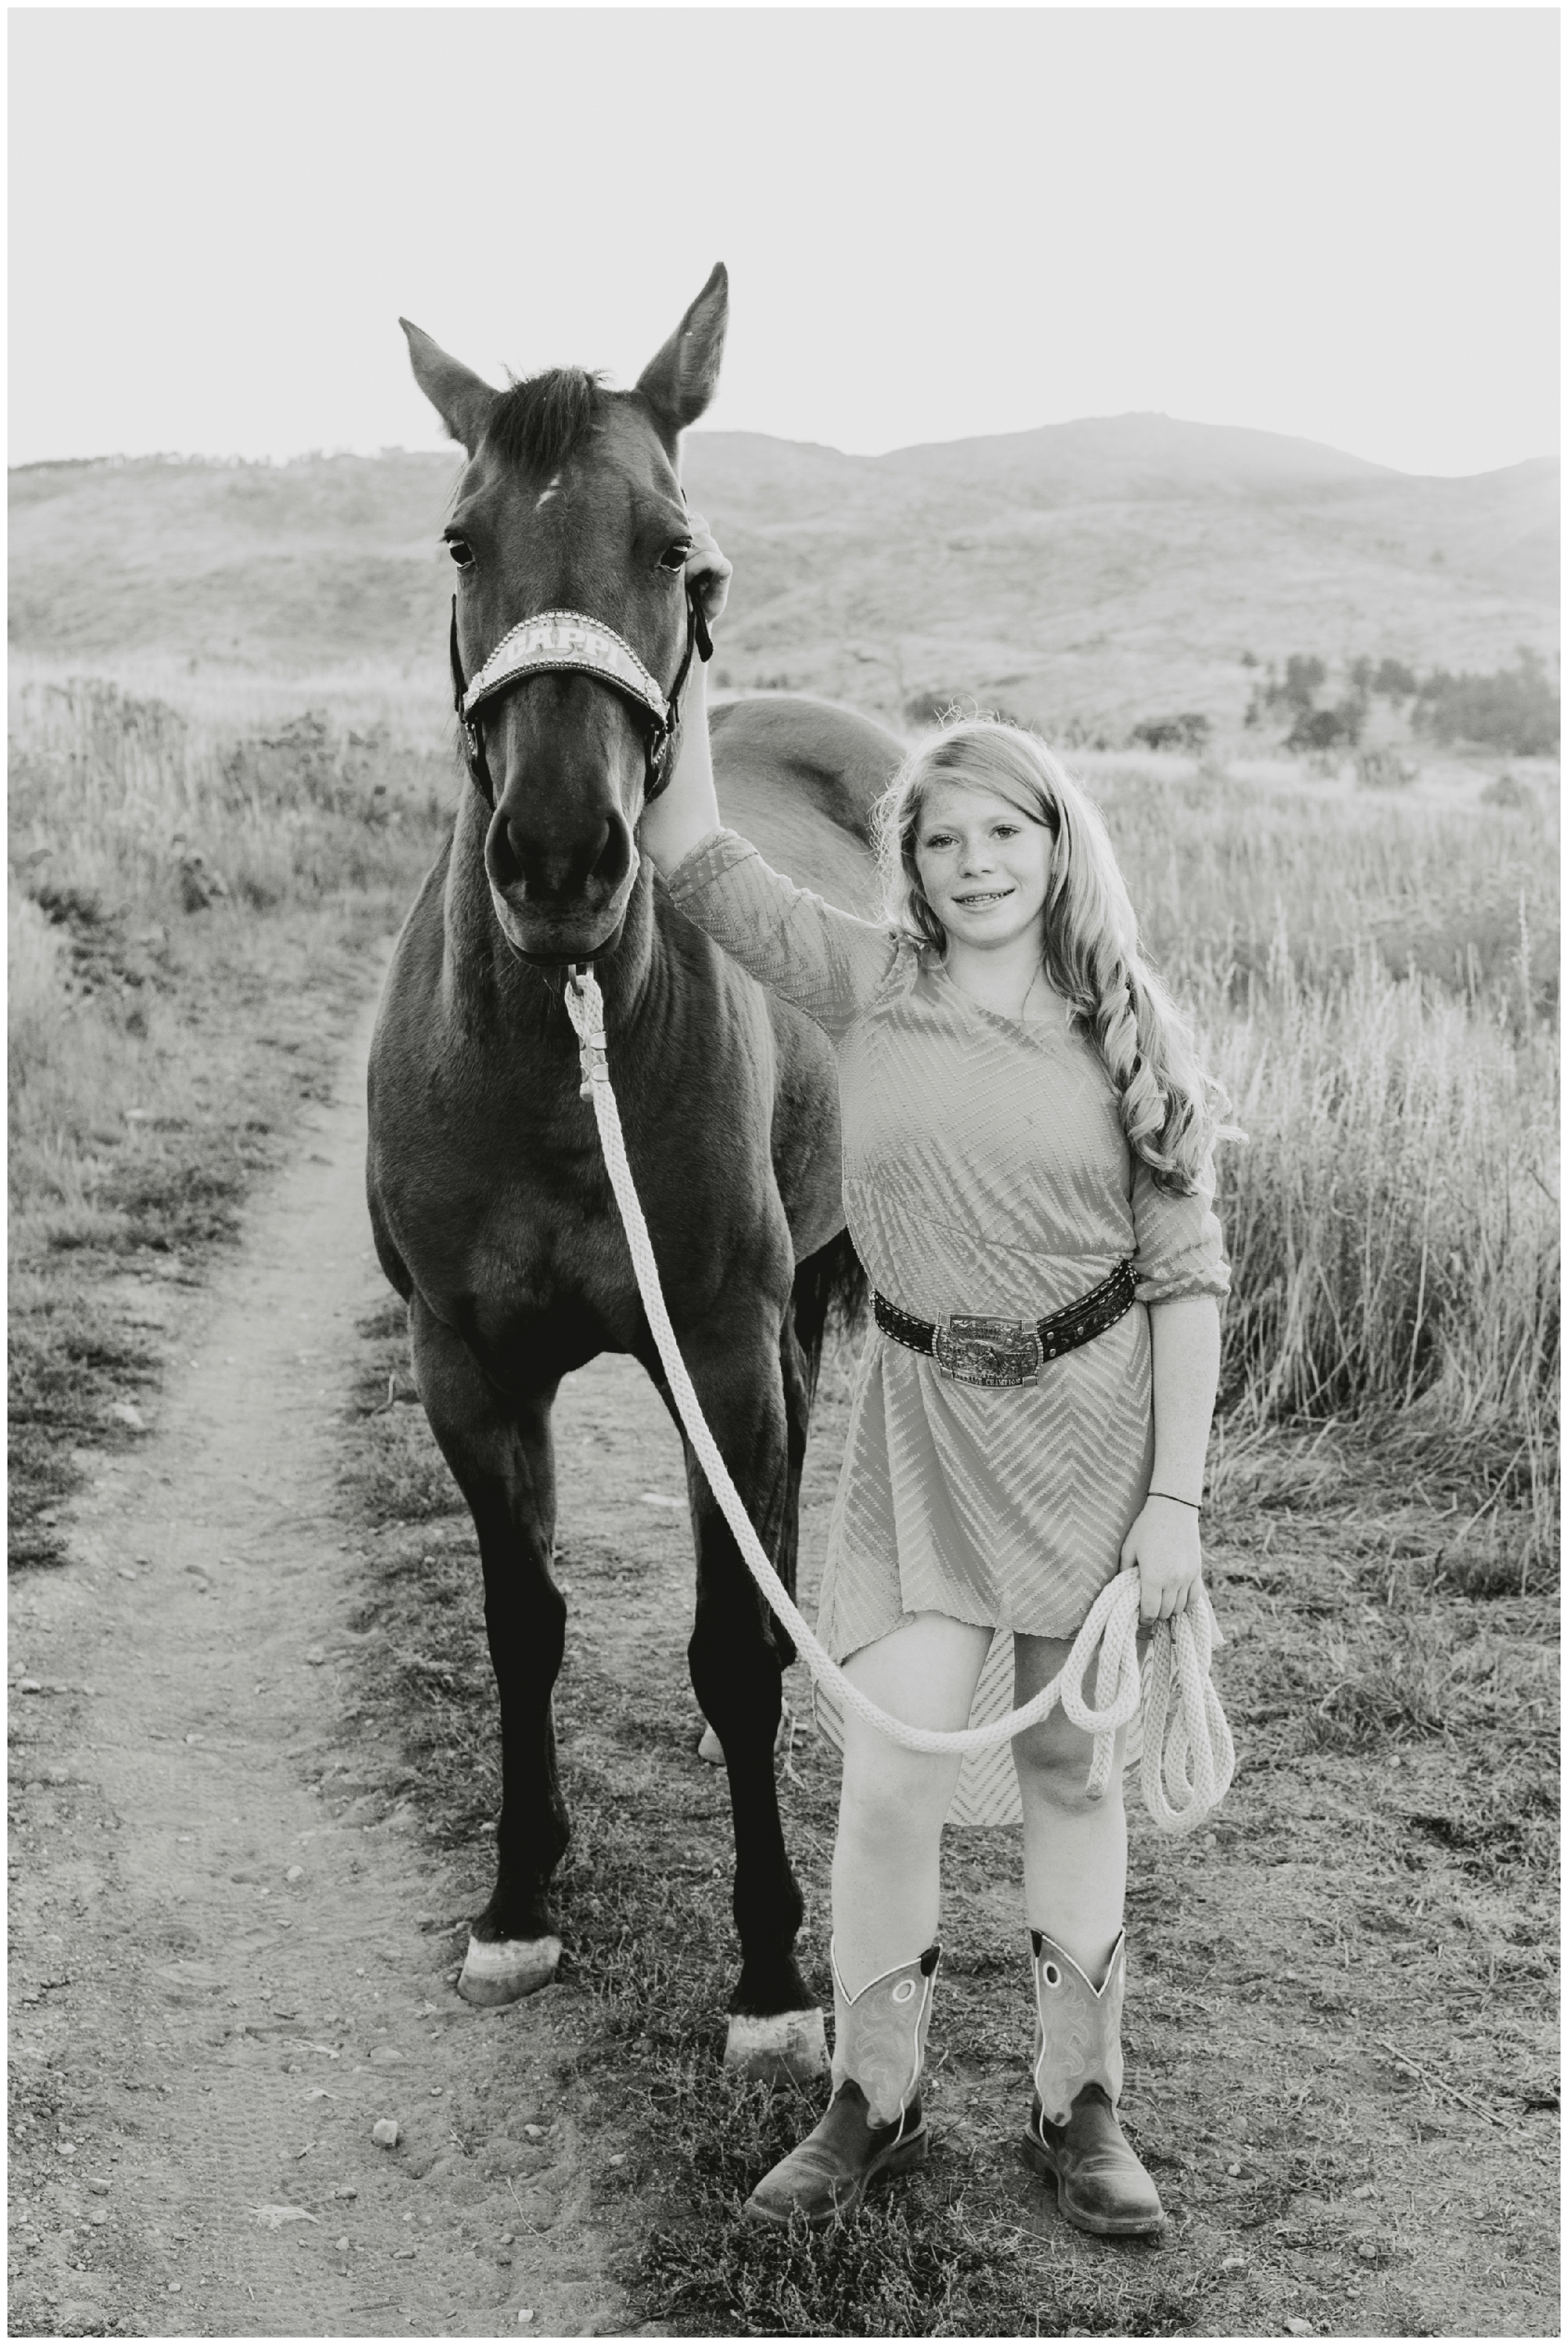 Colorado horse photography at Bobcat Ridge Natural Area by Plum Pretty Photography.